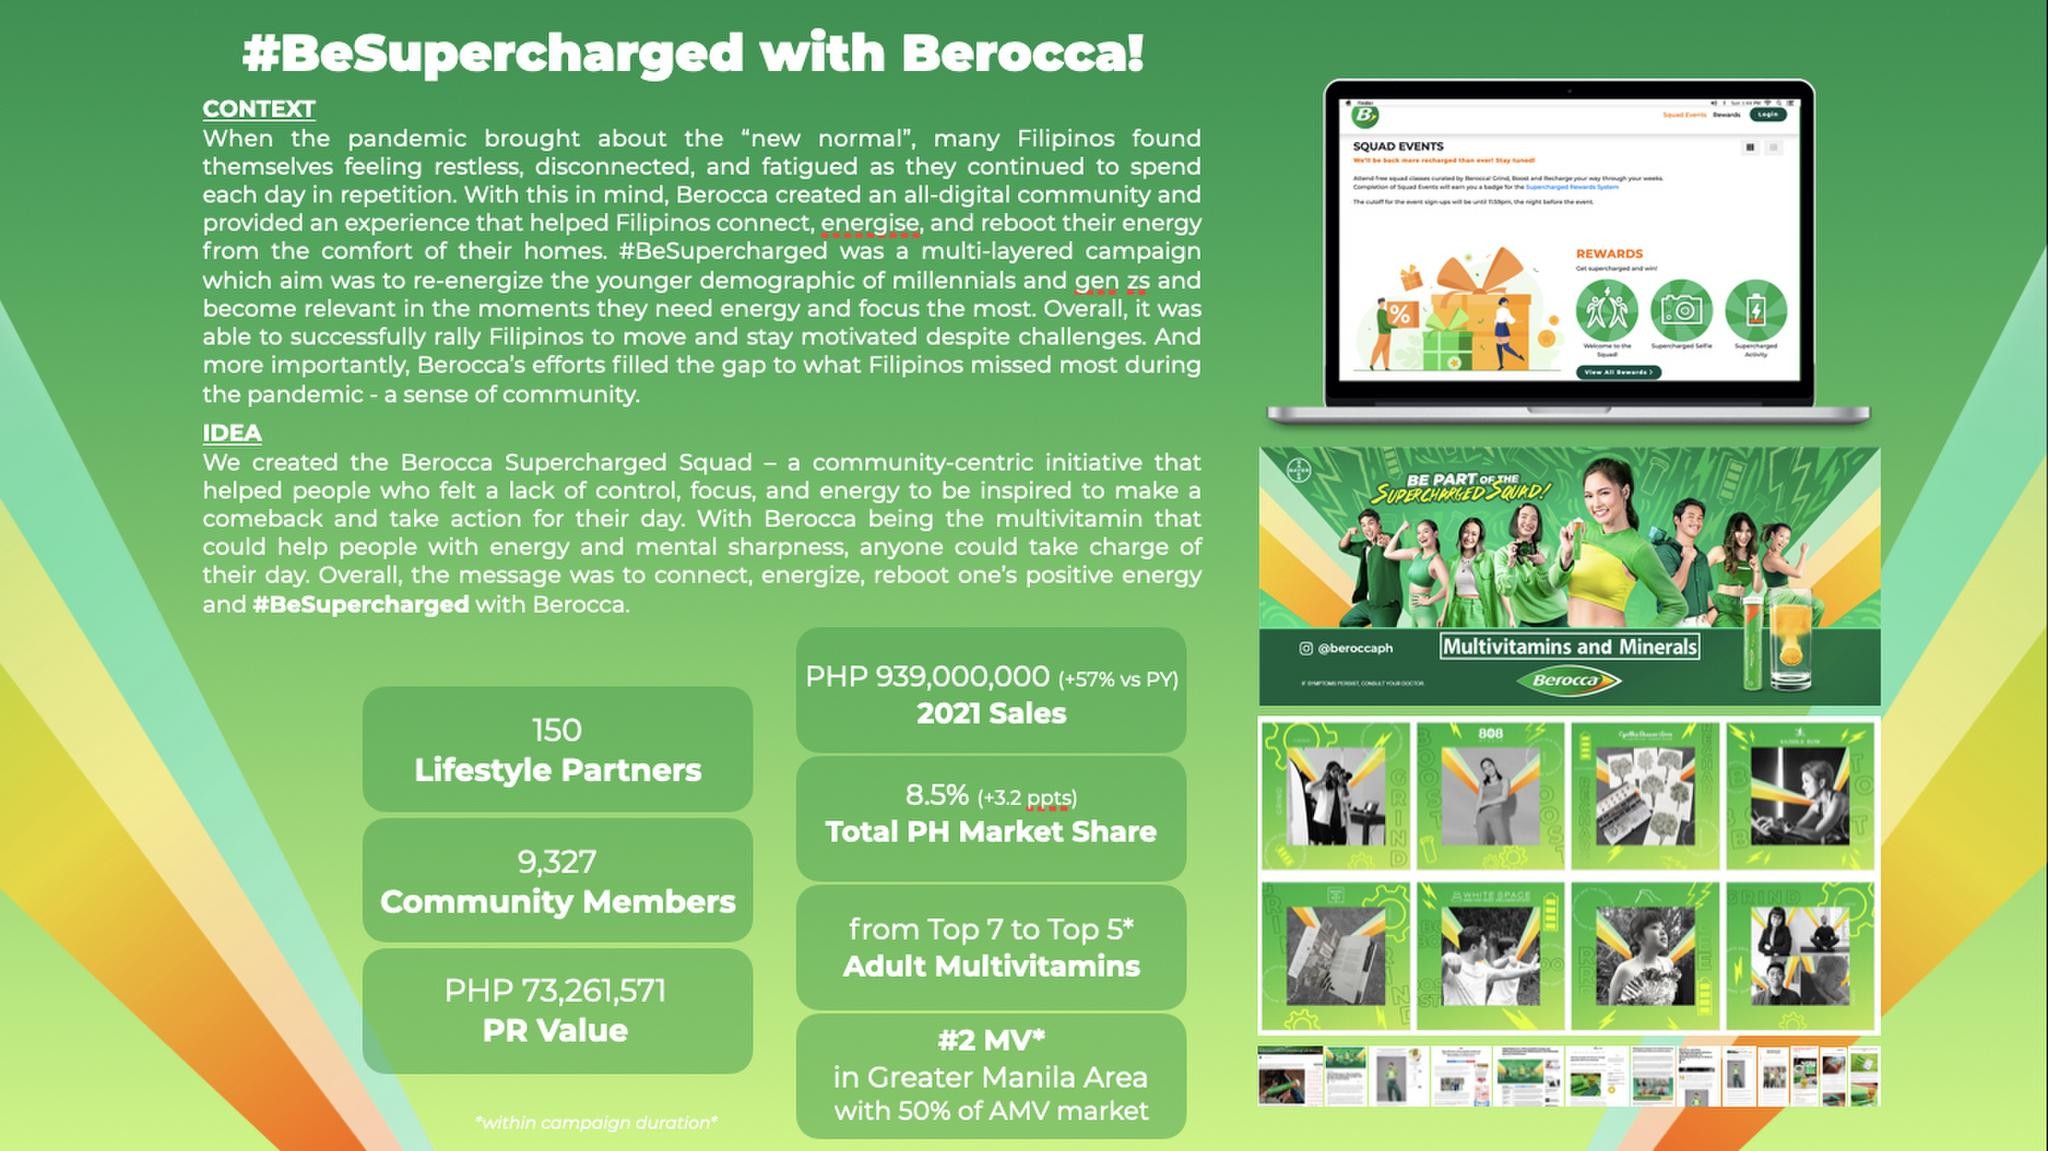 #BeSupercharged with Berocca